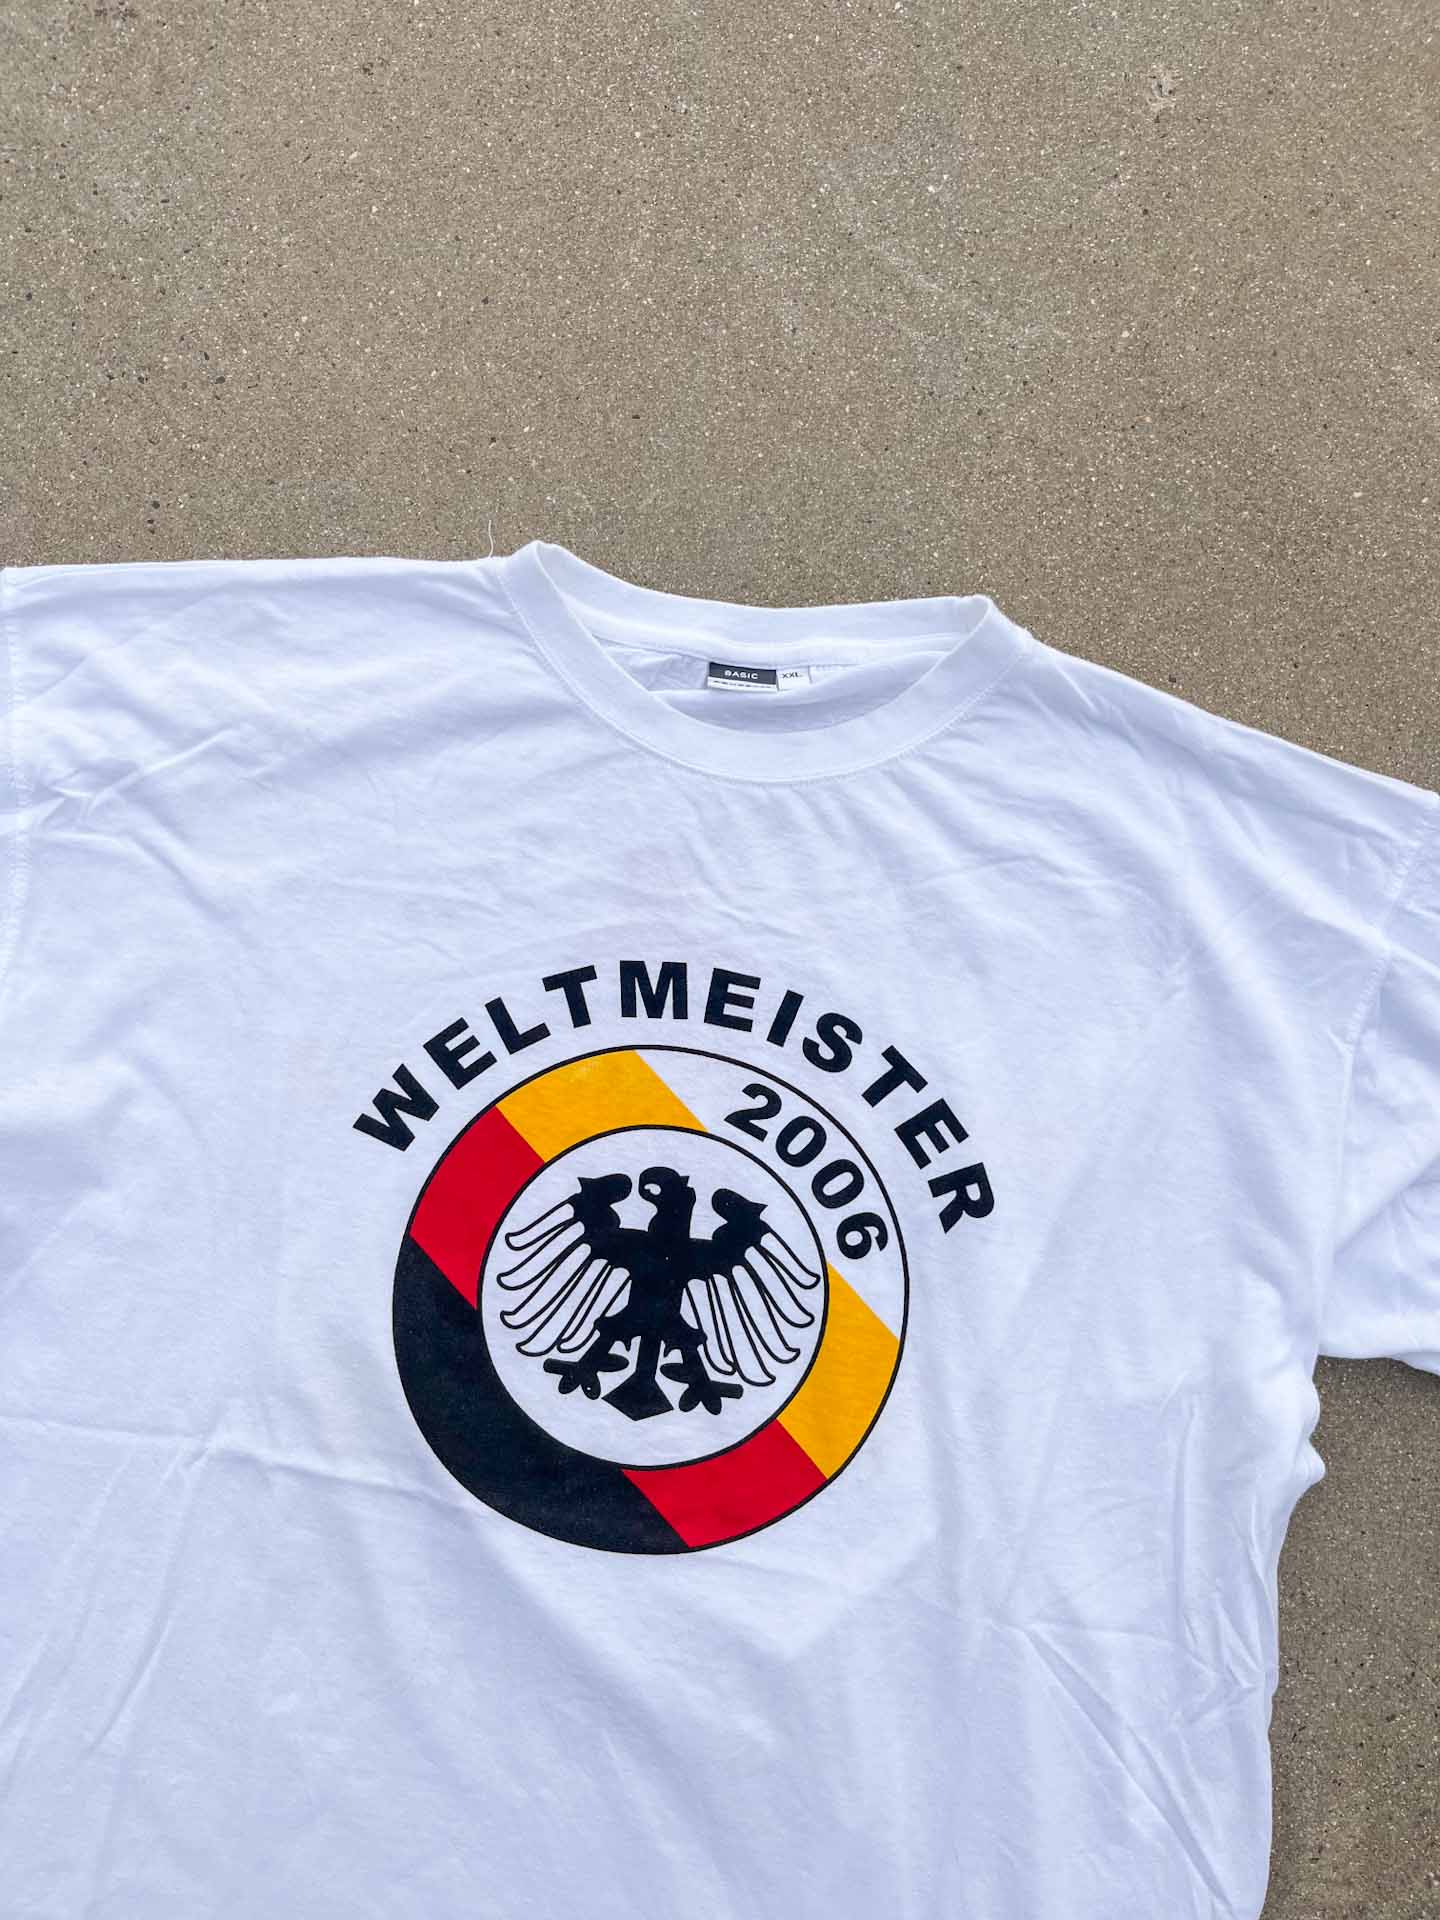 Weltmeister 2006 Germany